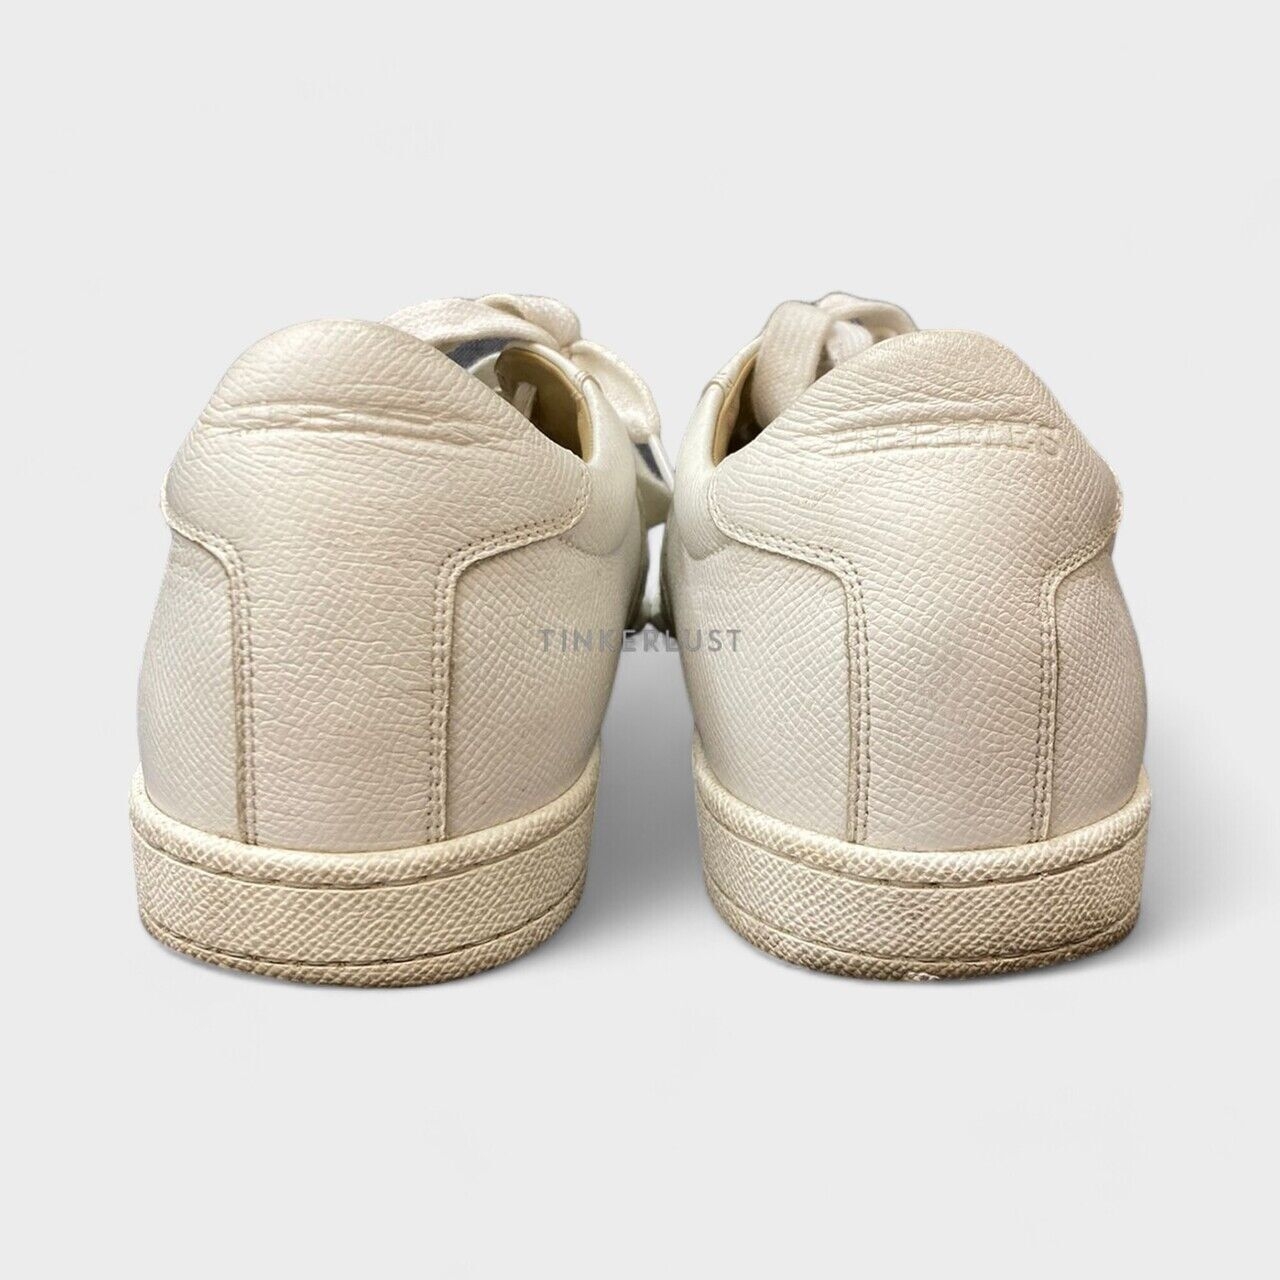 Hermes Off White Leather Sneakers